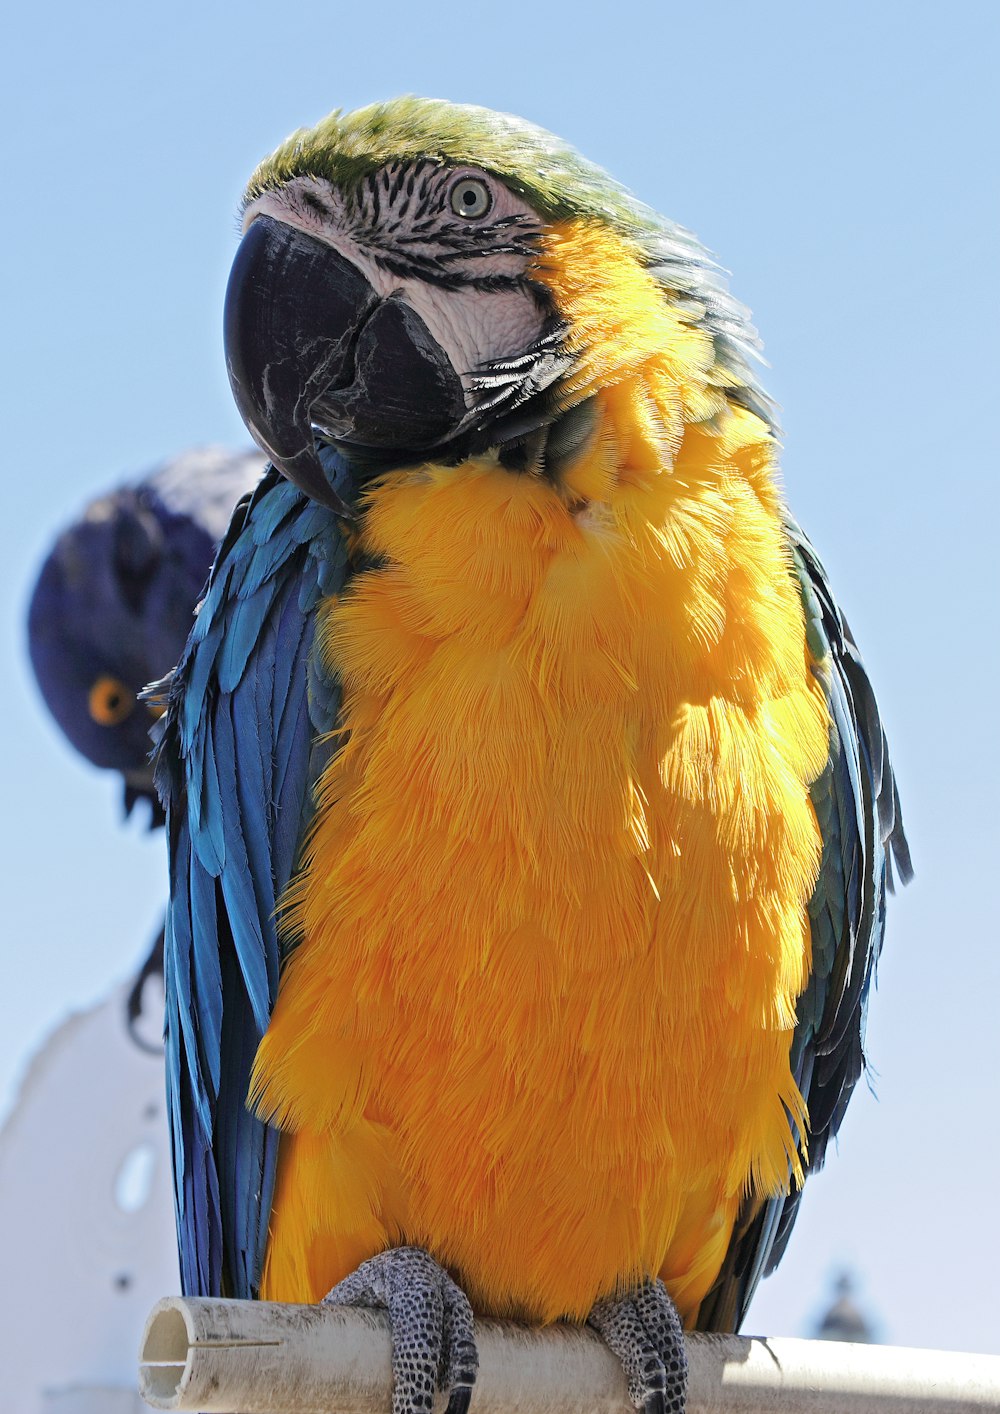 blue yellow and white macaw